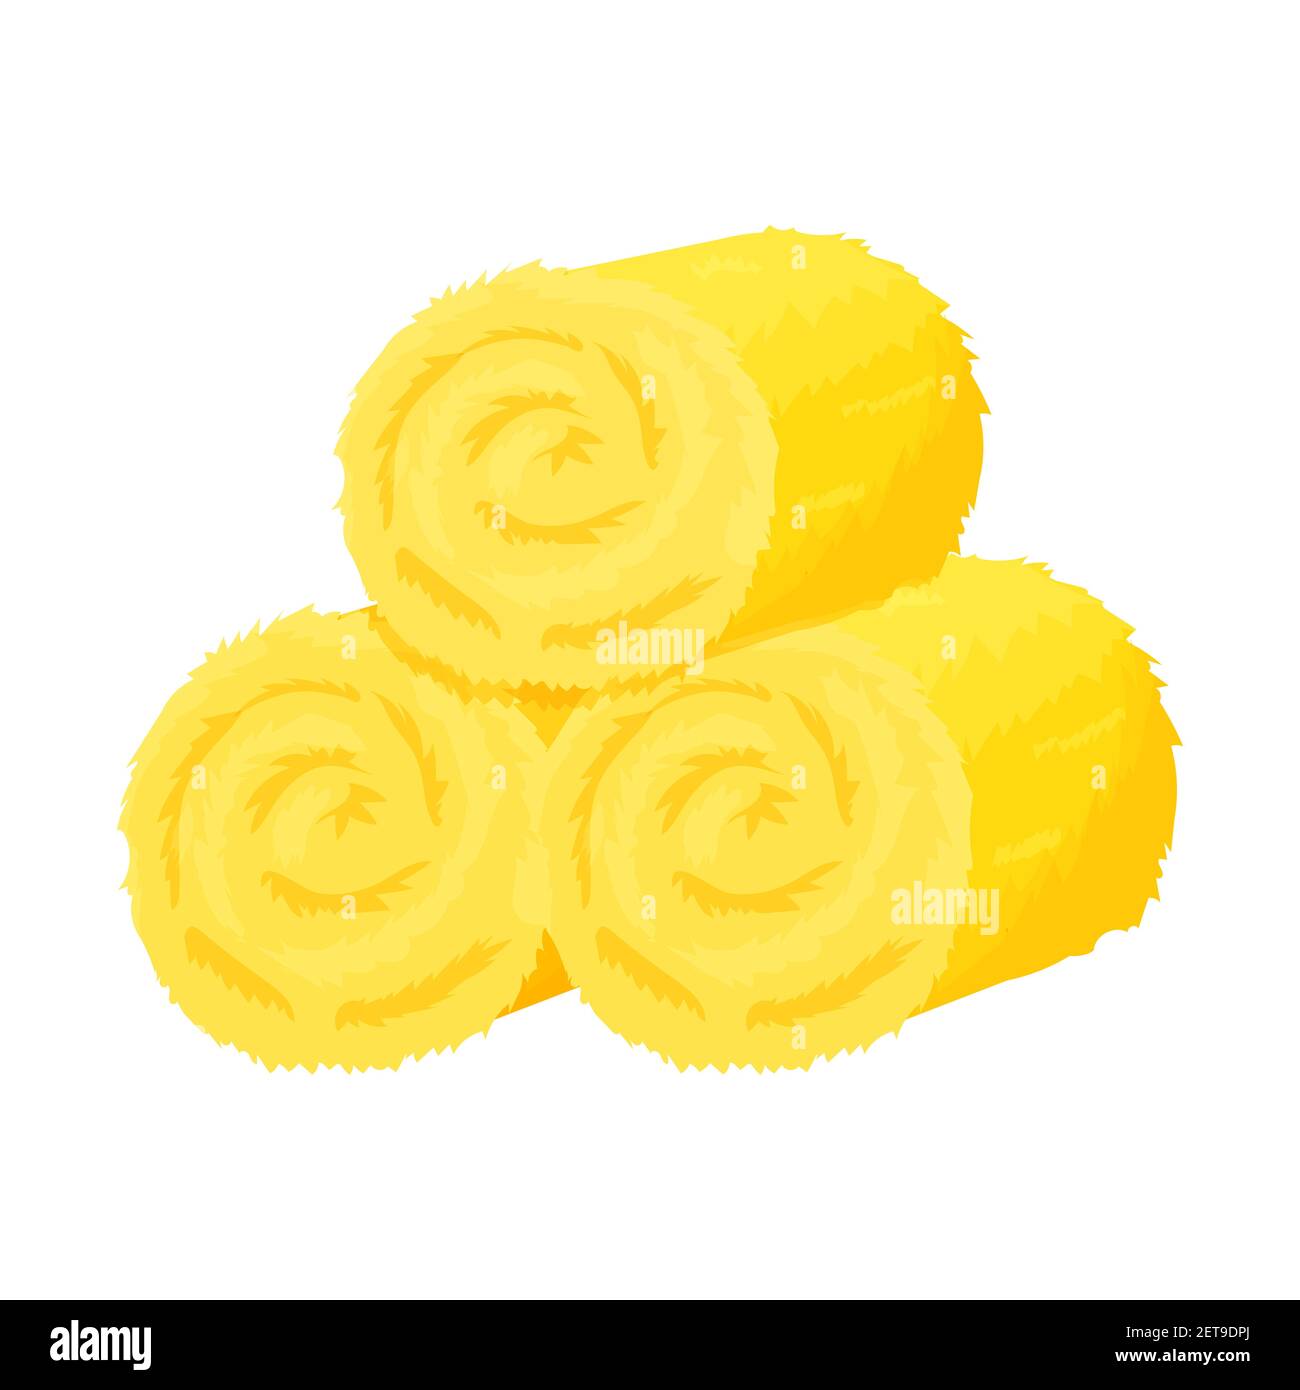 Dry bale of hay, haycock in cartoon style isolated on white background. Roll pile, straw stack. Agriculture harvest, farm work stock vector illustration. Vector illustration Stock Vector